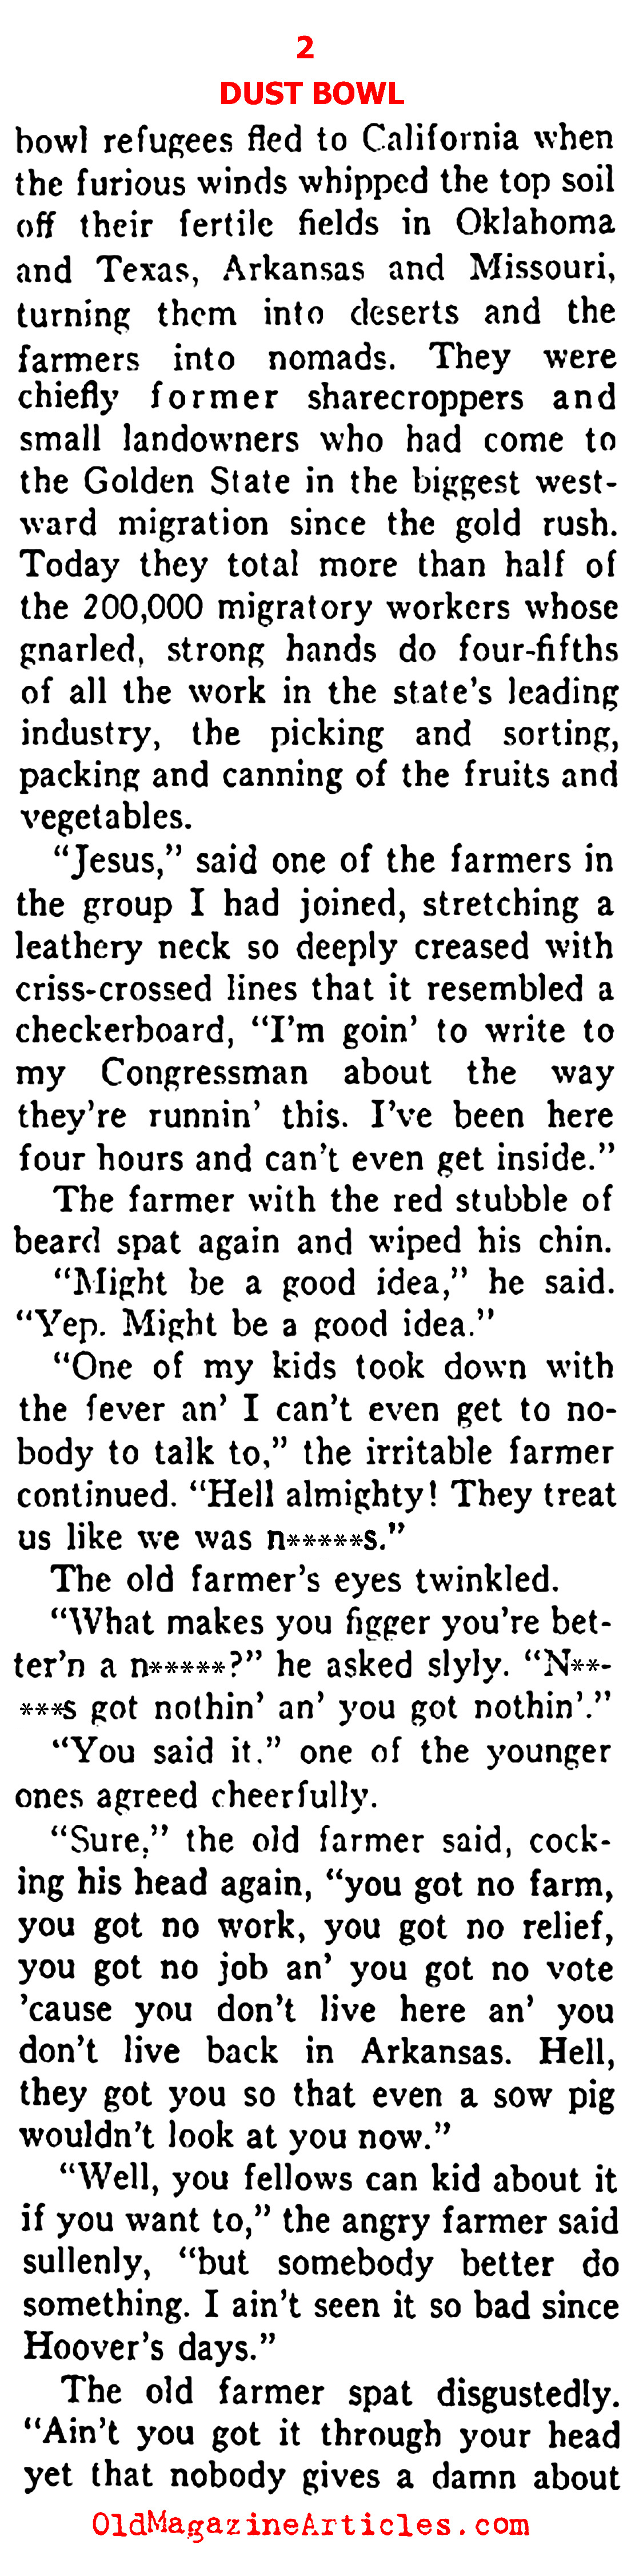 The 'Okies' and the Dust Bowl (Ken Magazine, 1938)